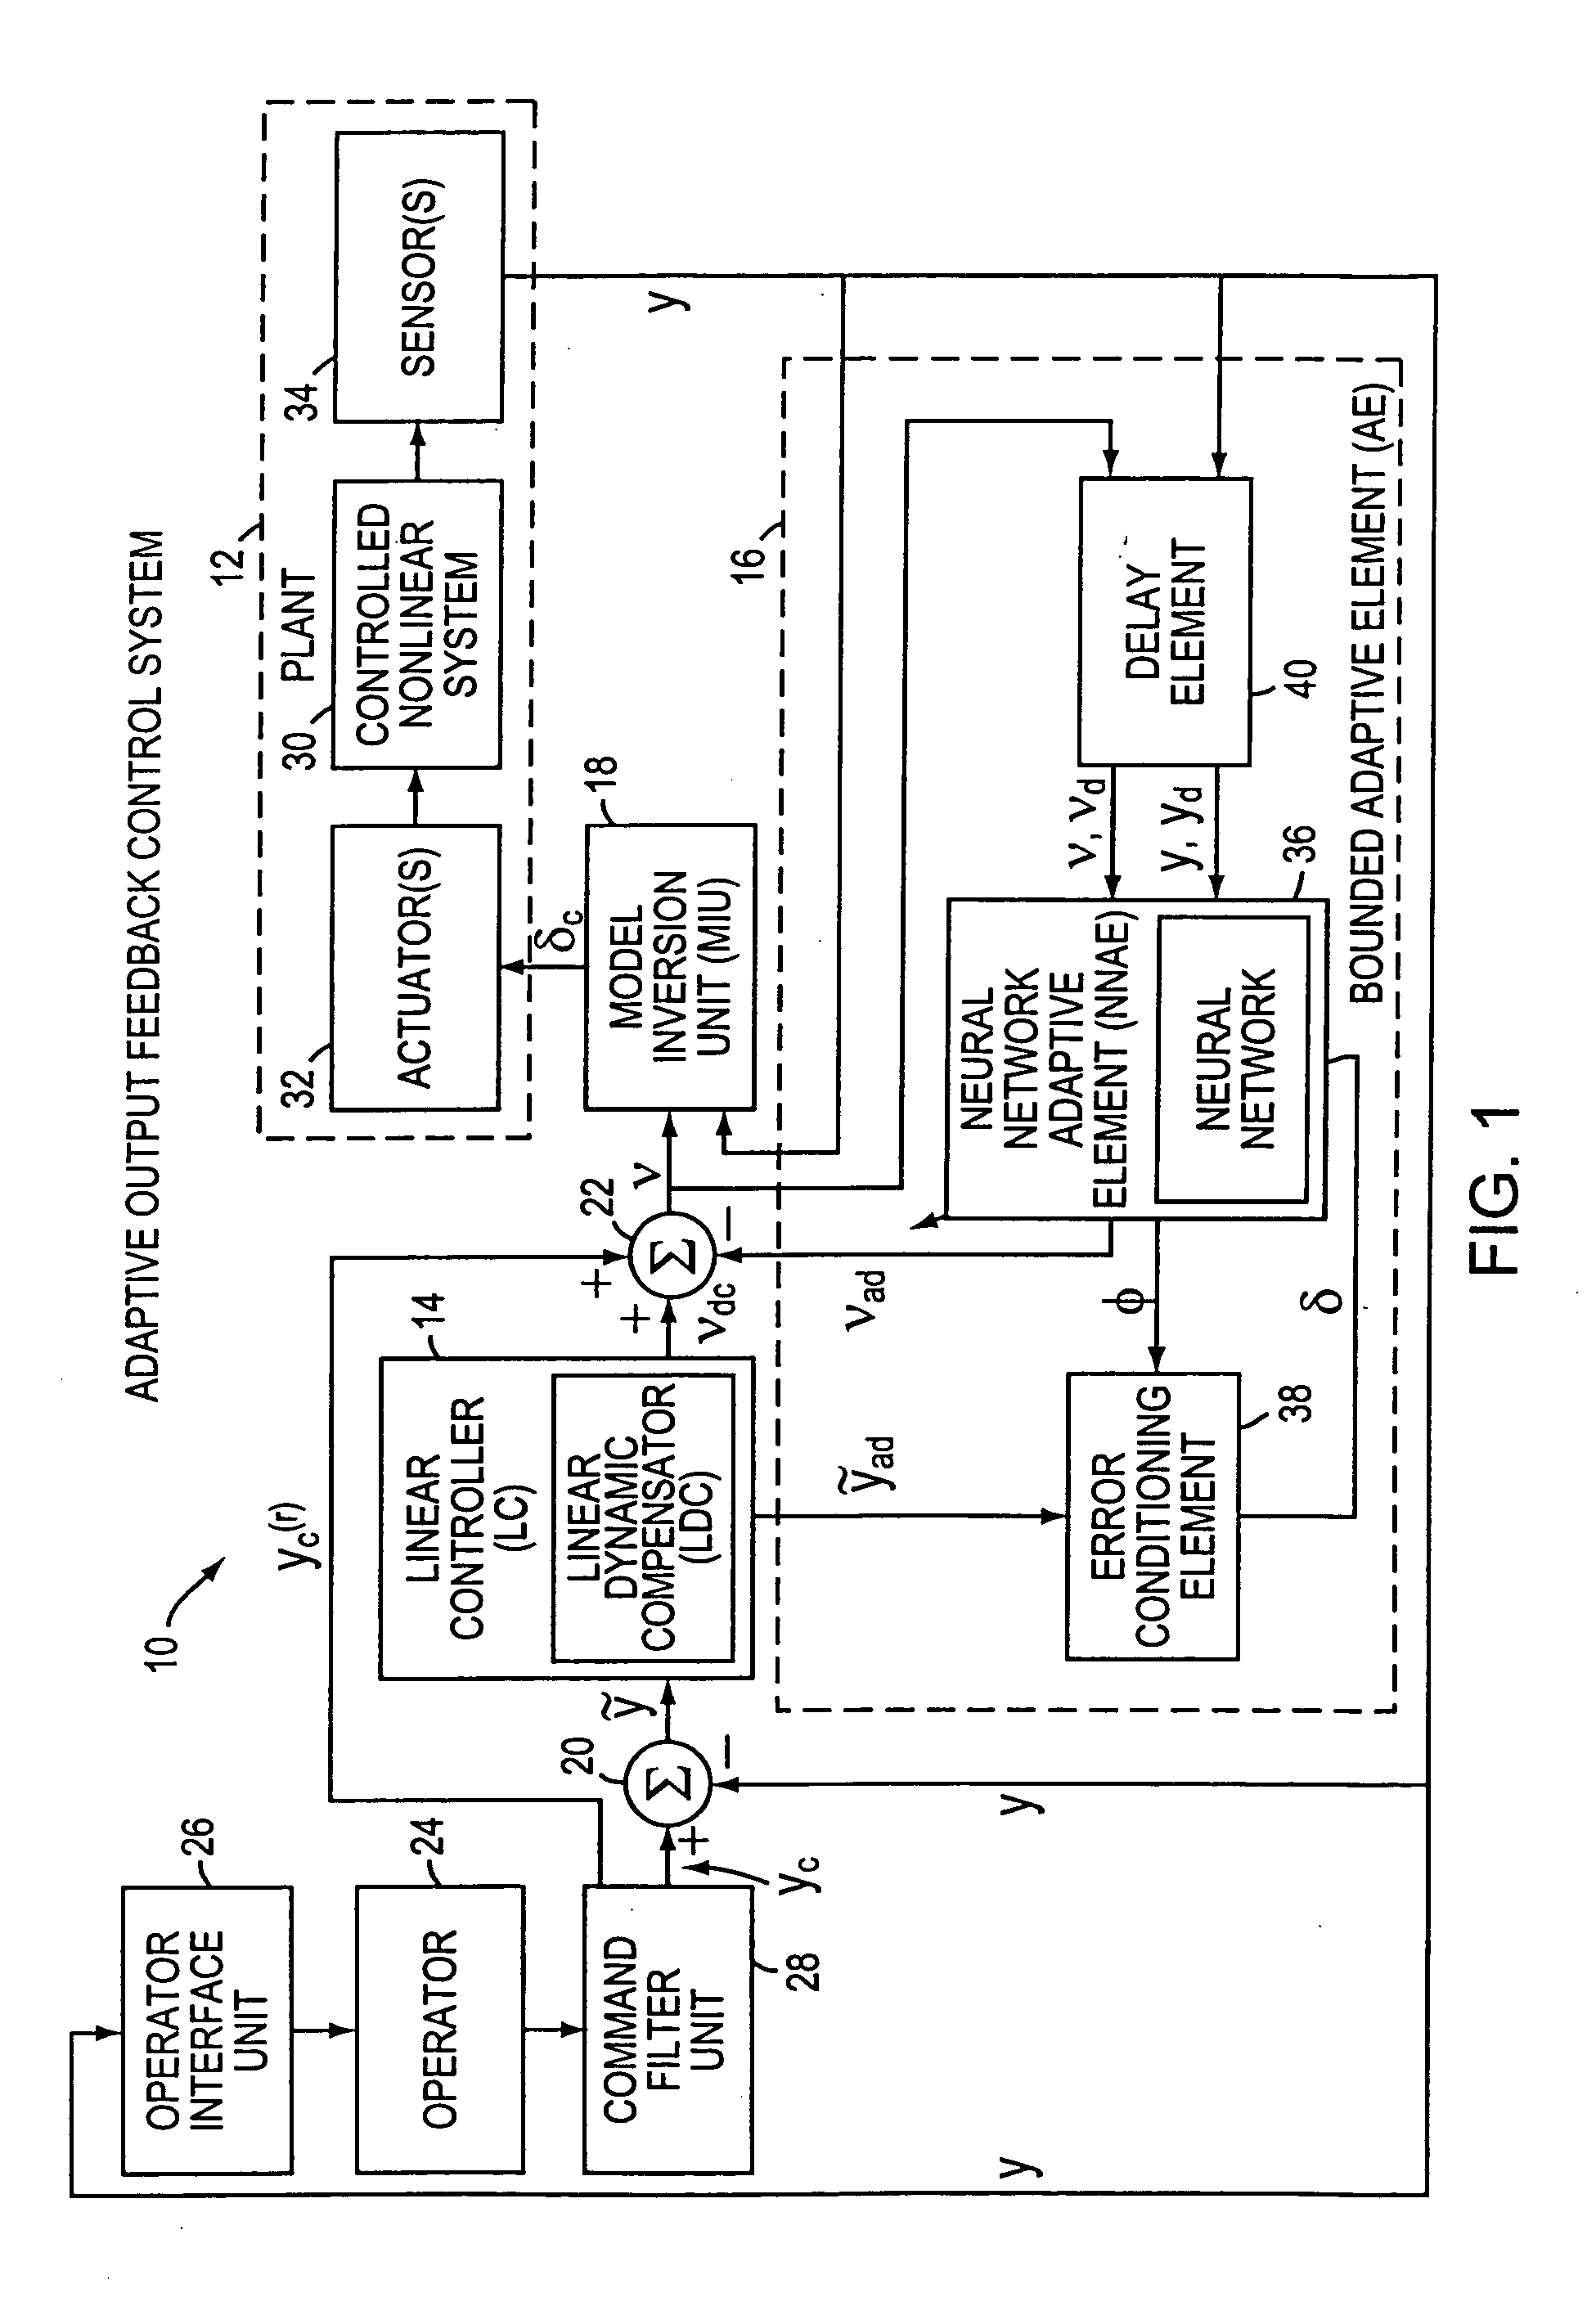 Adaptive control system having direct output feedback and related apparatuses and methods